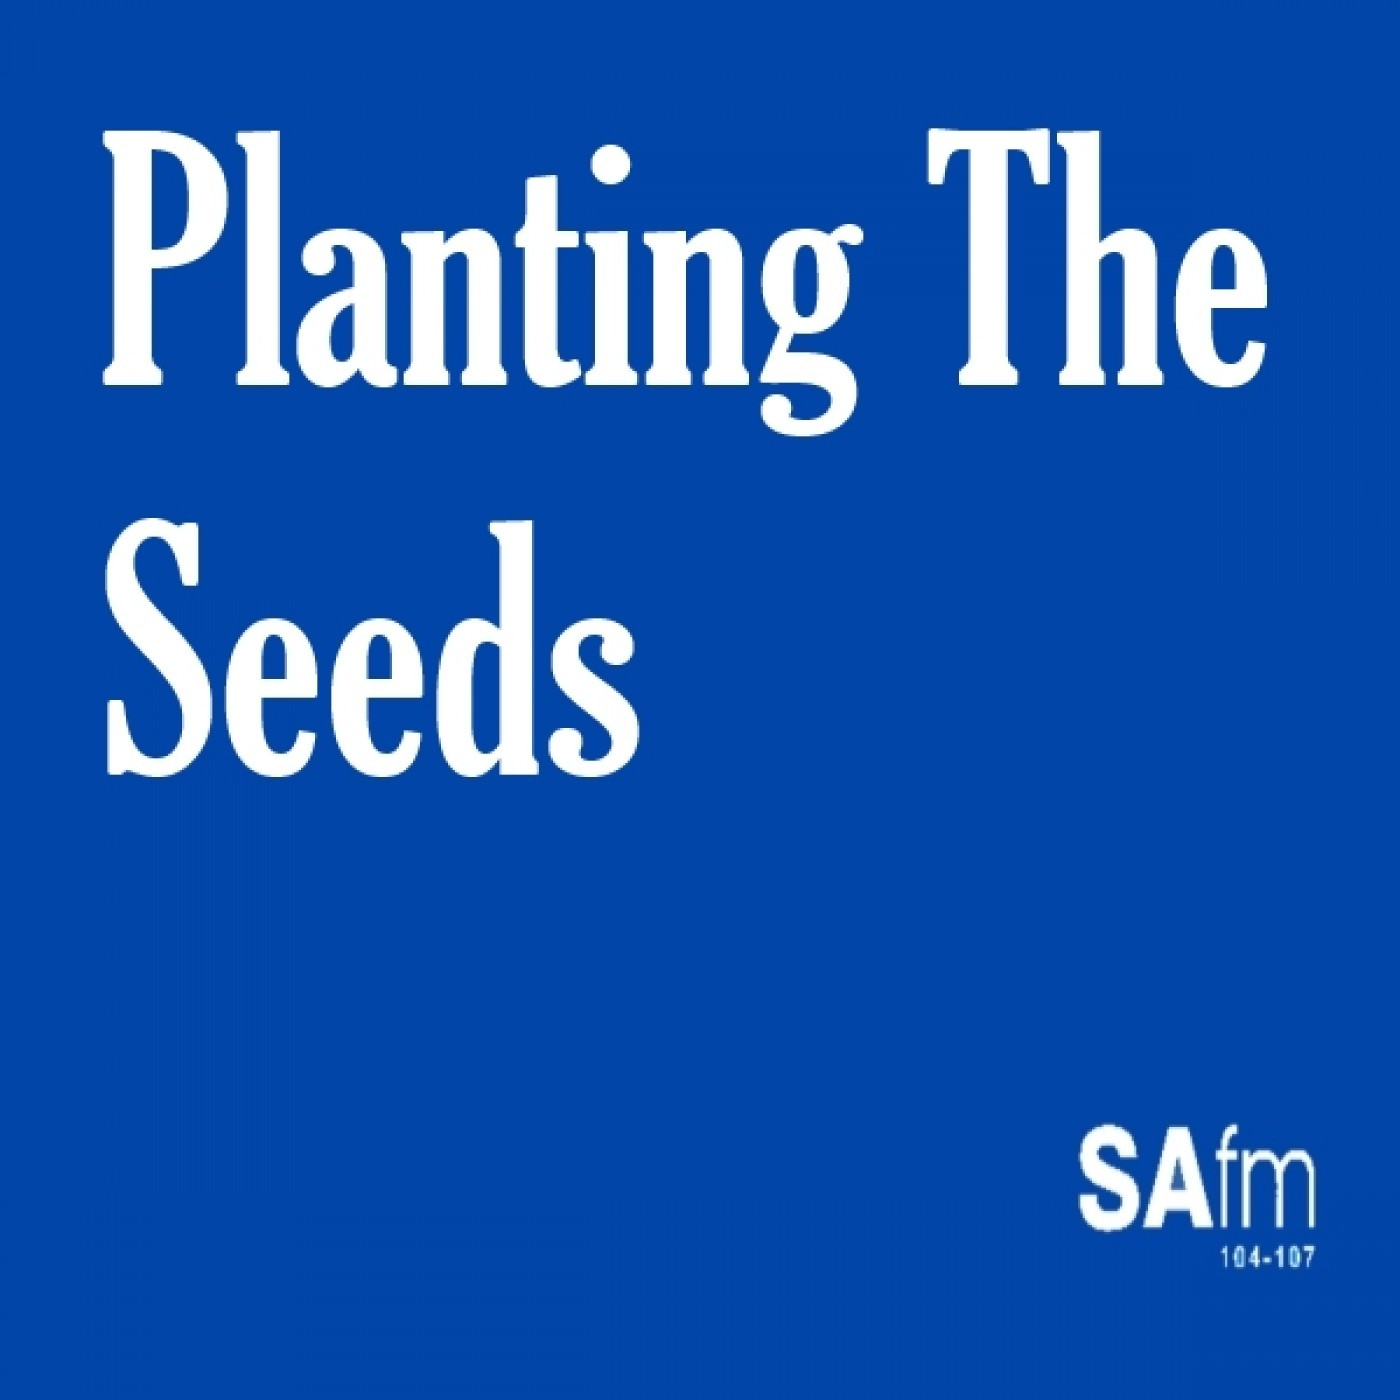 25-03-2019 PLANTING THE SEEDS